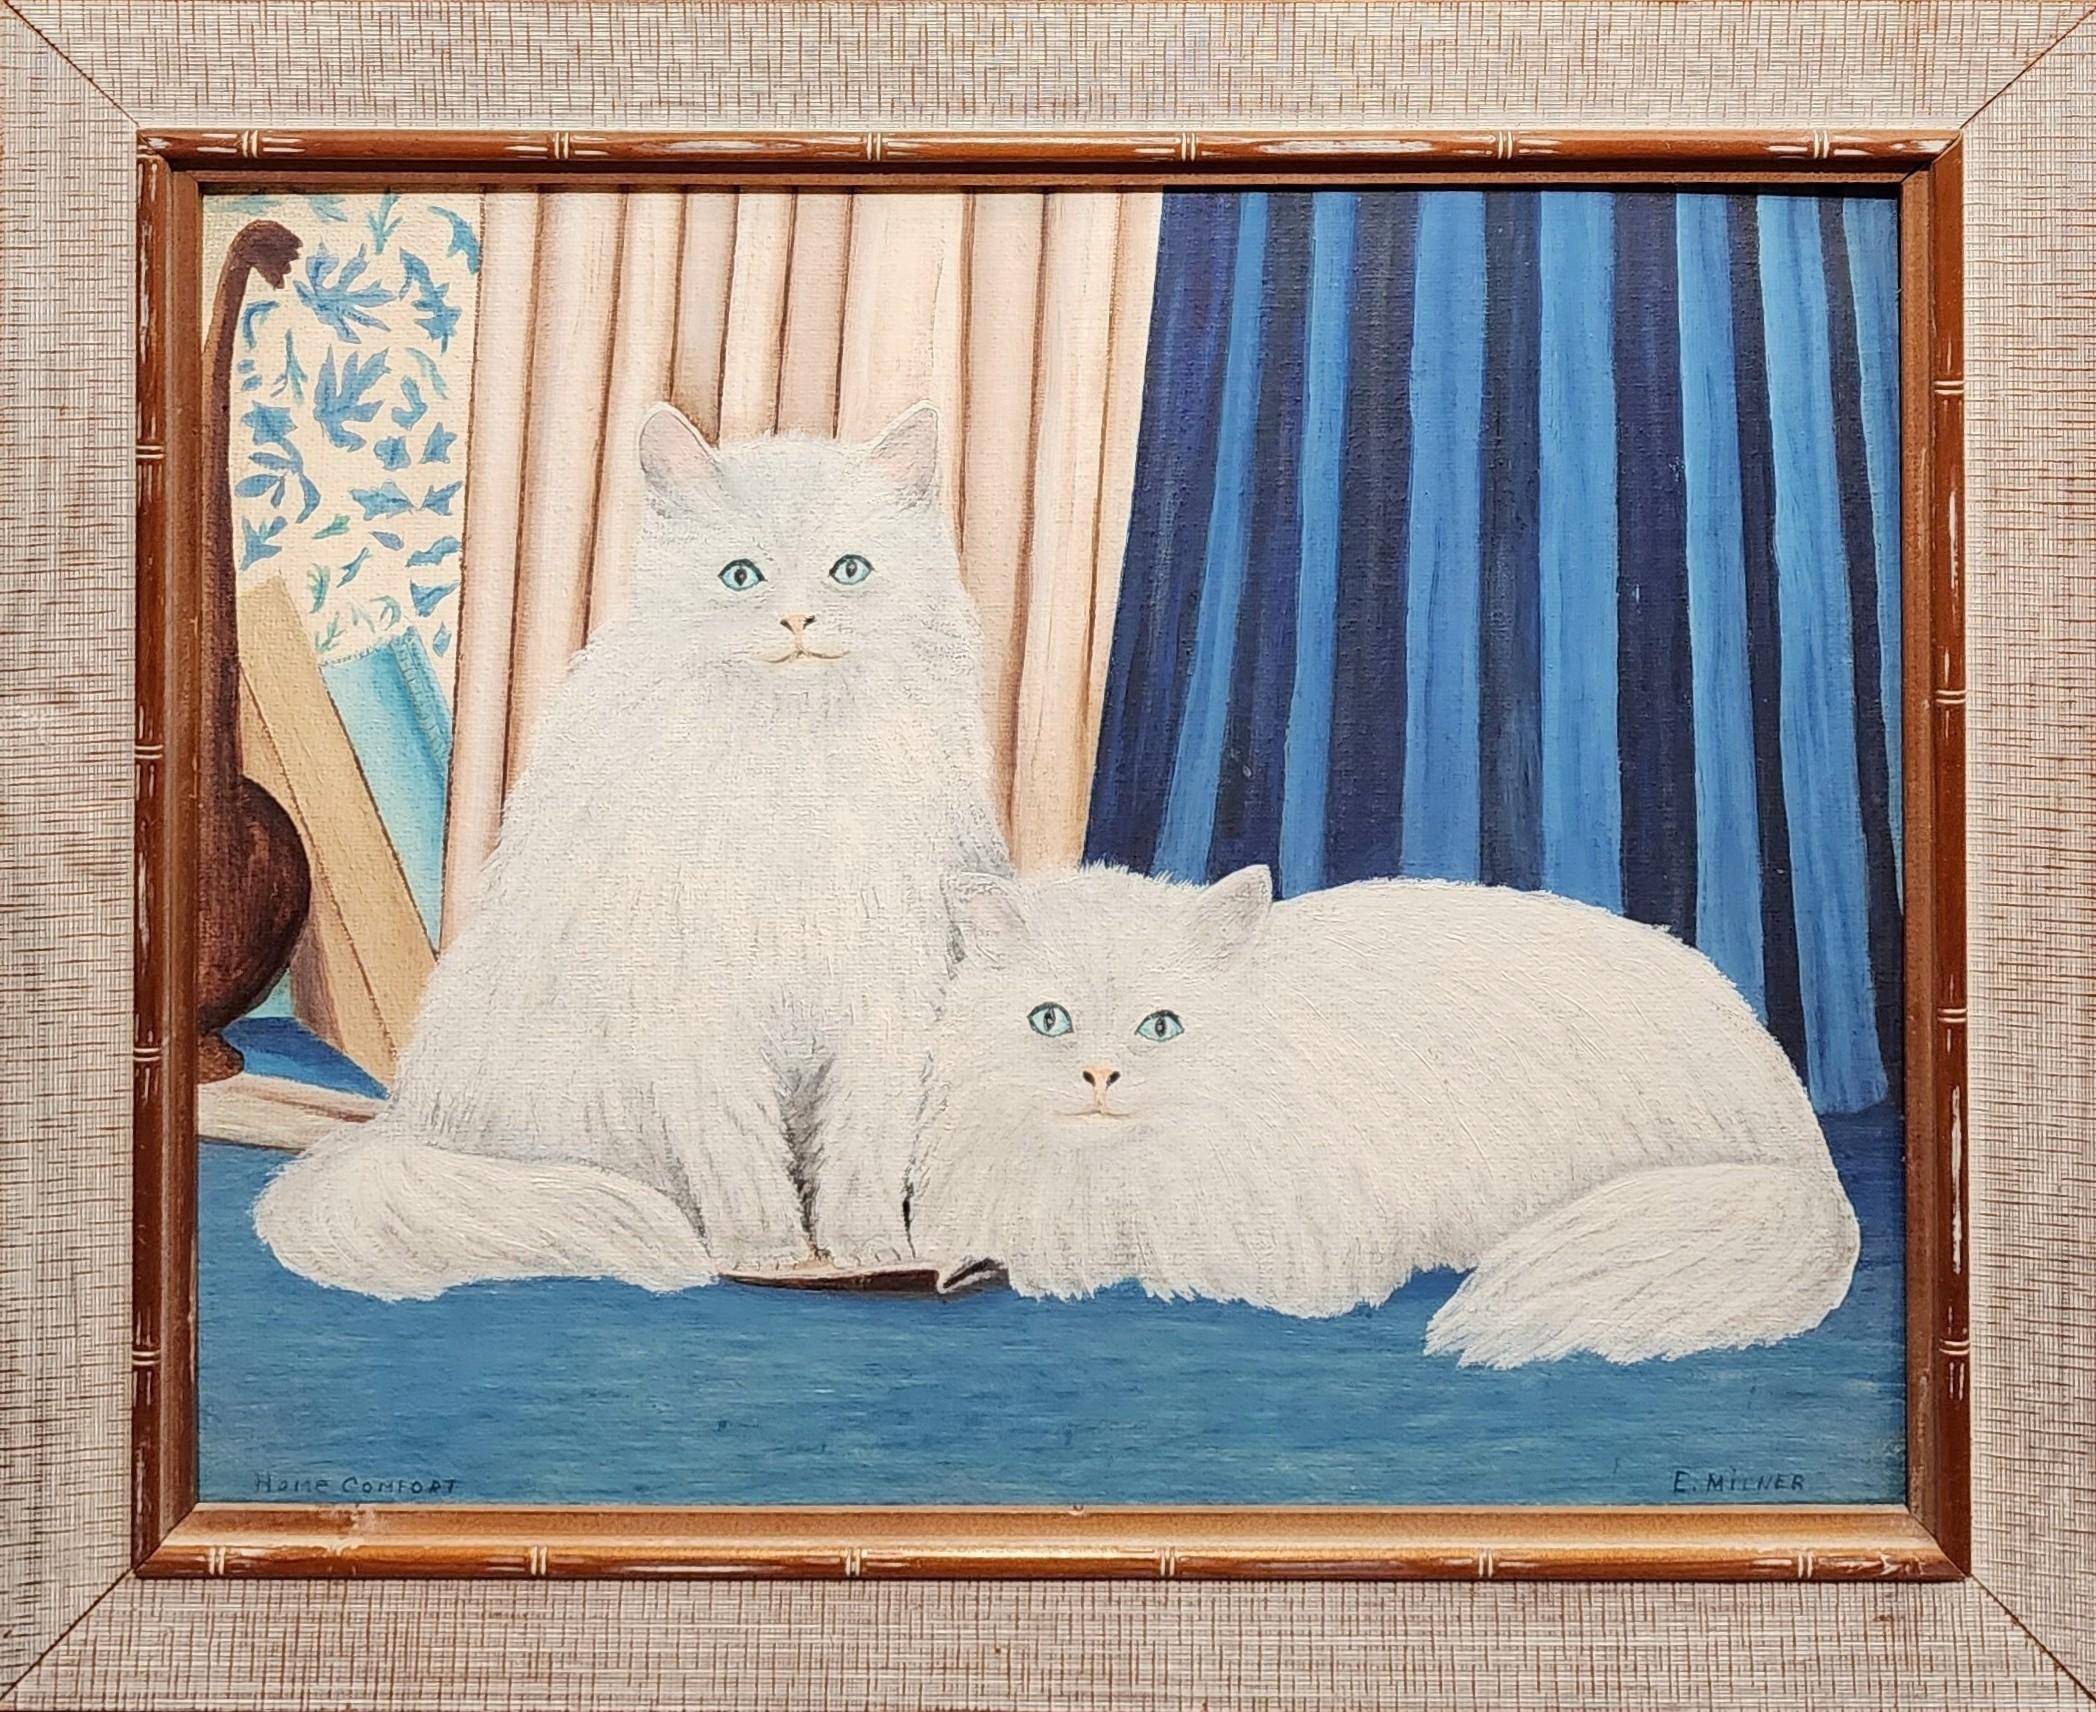 Home Comfort, White Cats with Weird Faces, Bad Art? You Decide 